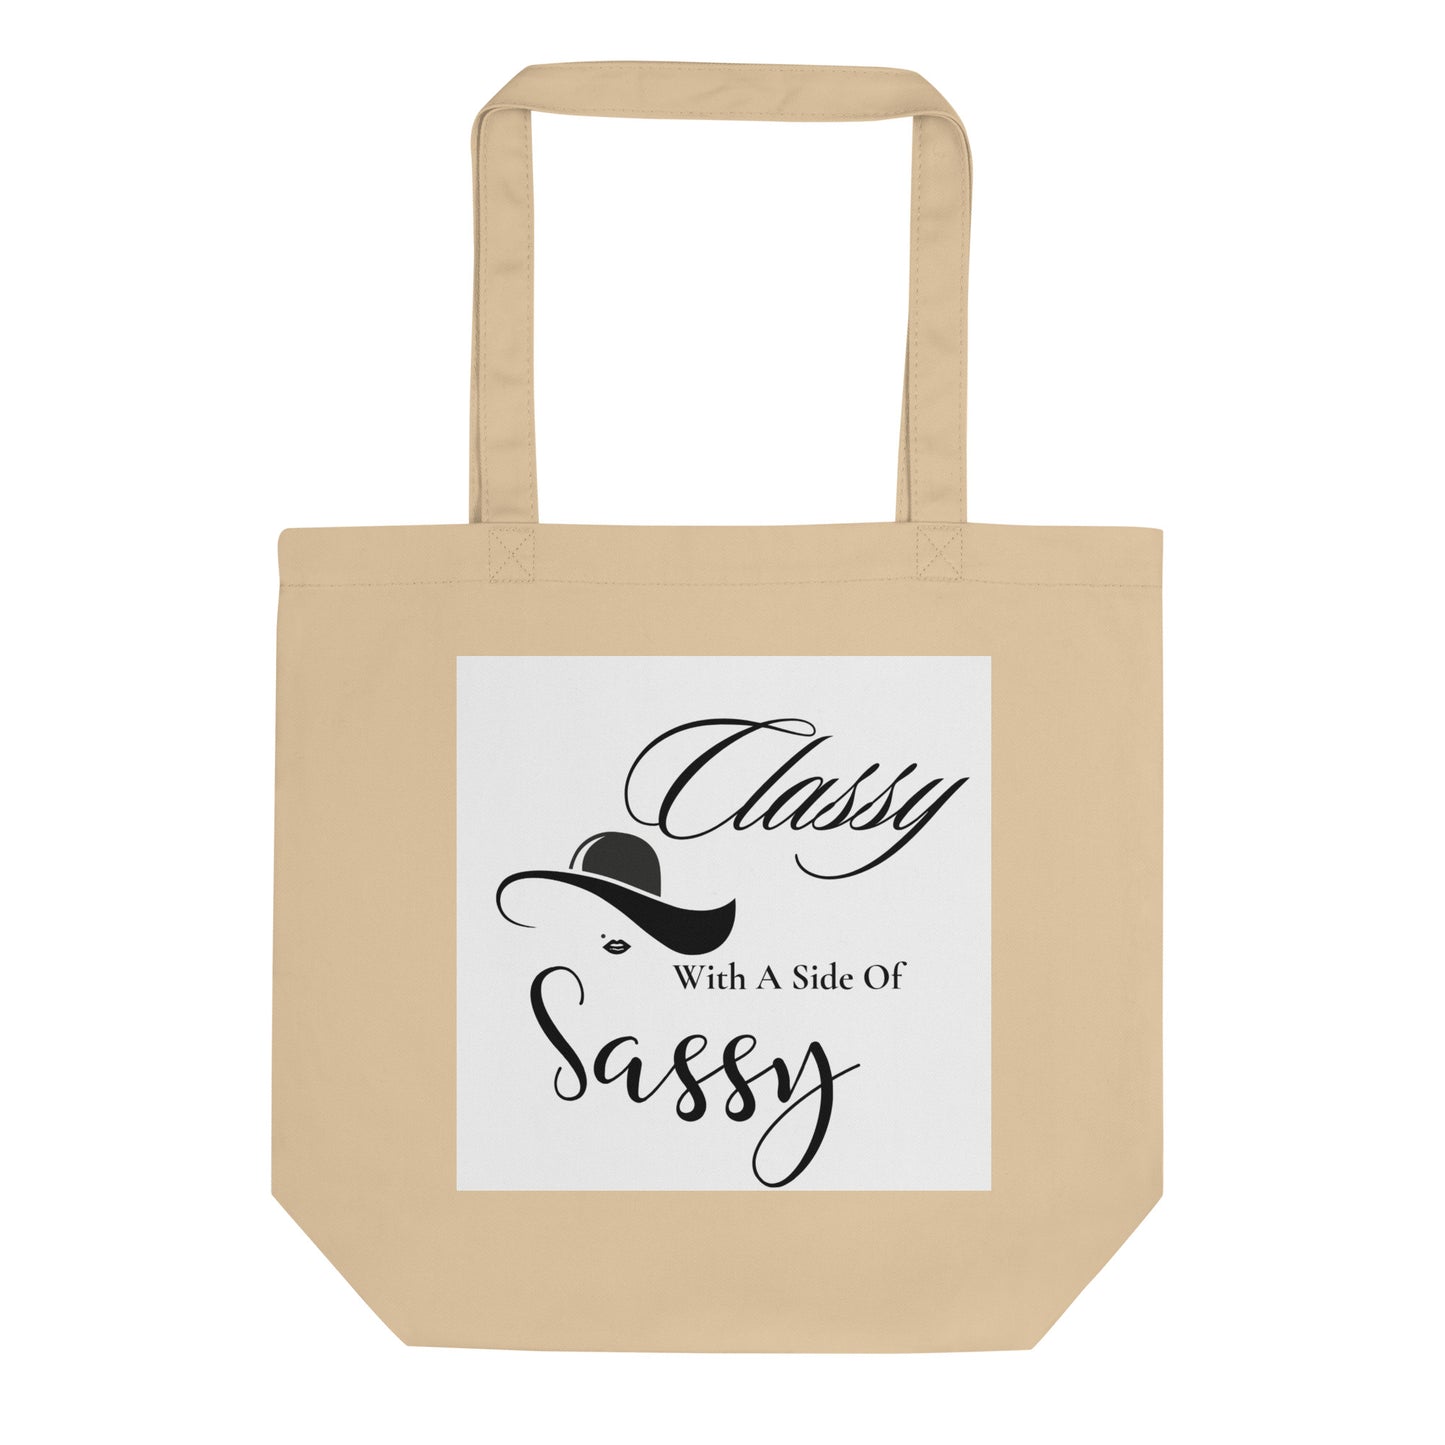 Classy with a side of Sassy Eco Tote Bag